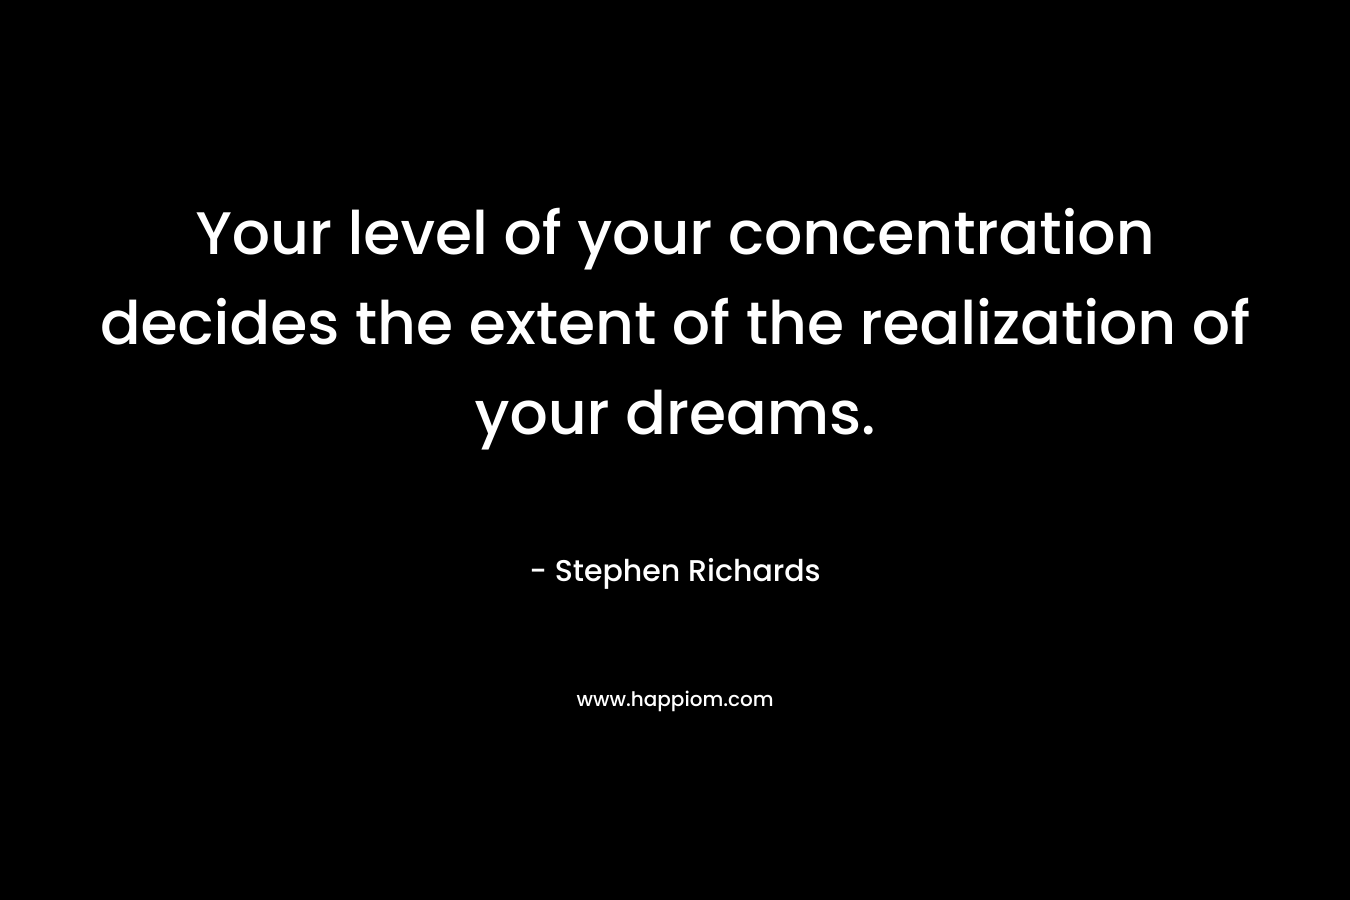 Your level of your concentration decides the extent of the realization of your dreams. – Stephen Richards